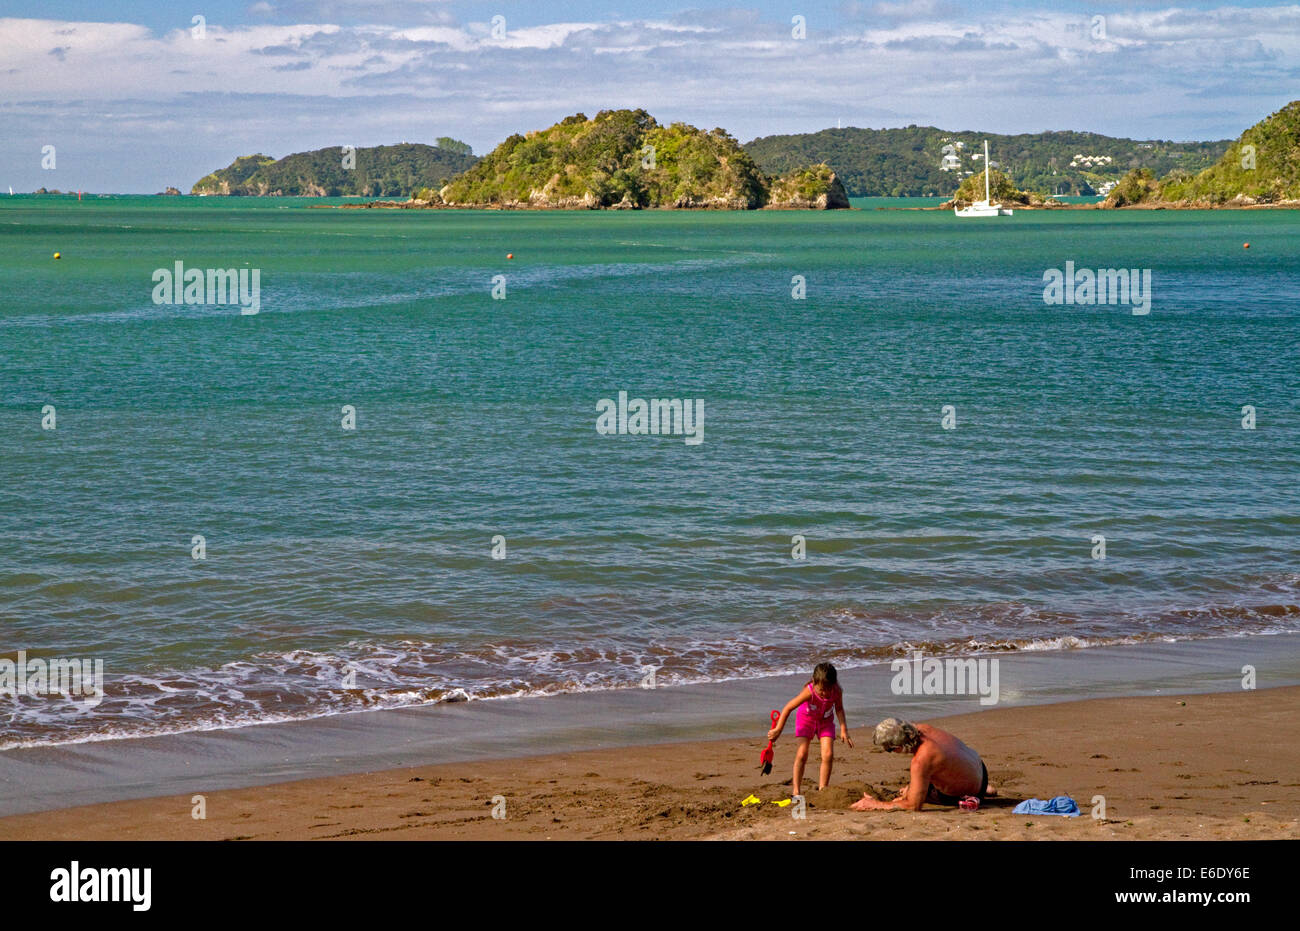 People on the beach at Bay of Islands at the town of Paihia, North Island, New Zealand. Stock Photo